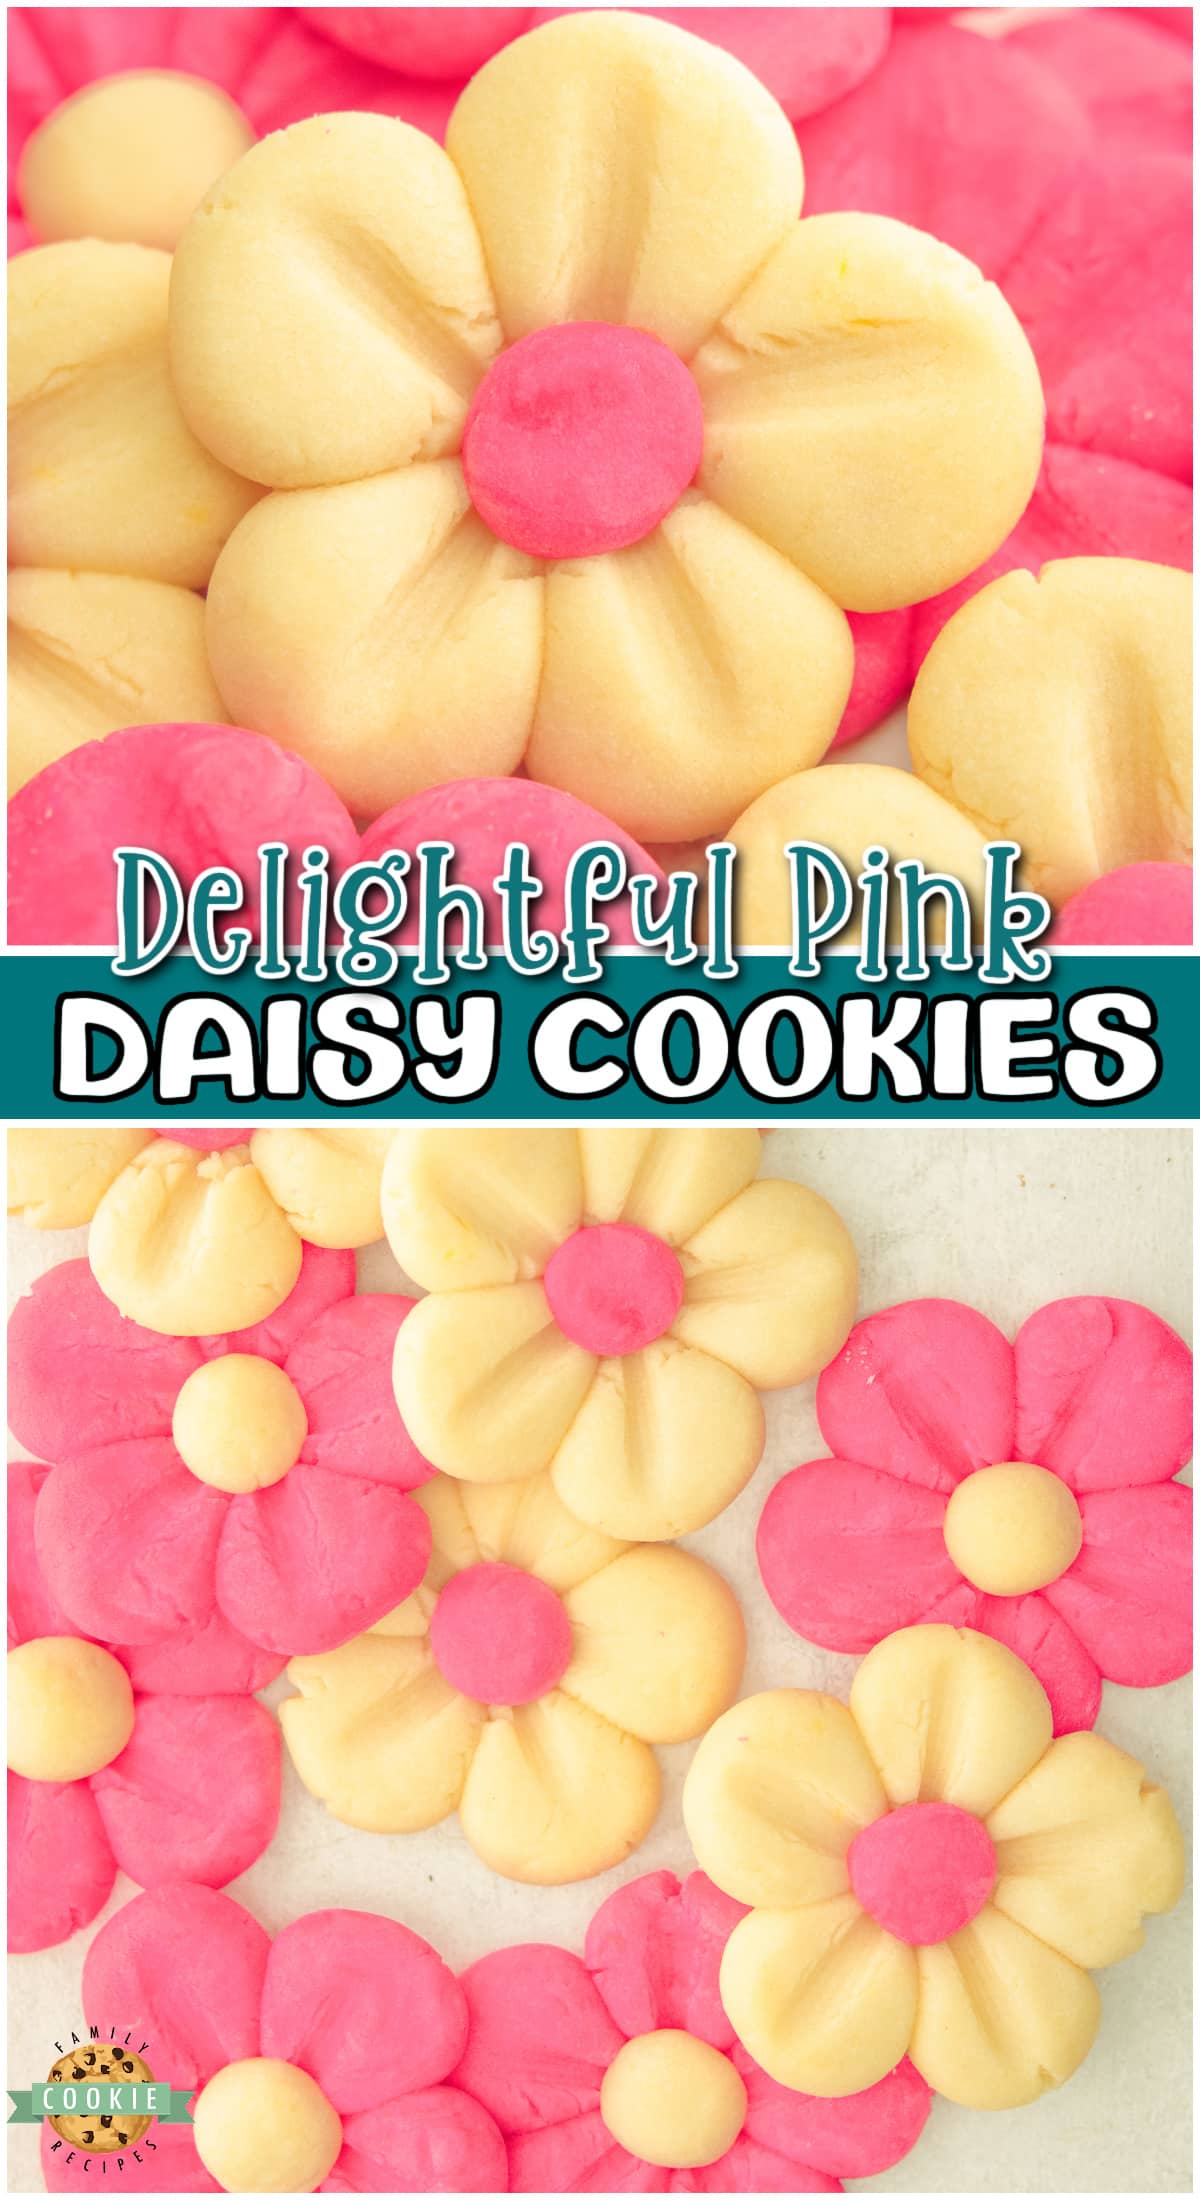 Pink Daisy Cookies are made from a buttery vanilla dough formed to look like pretty blooming flower petals perfect for parties! 